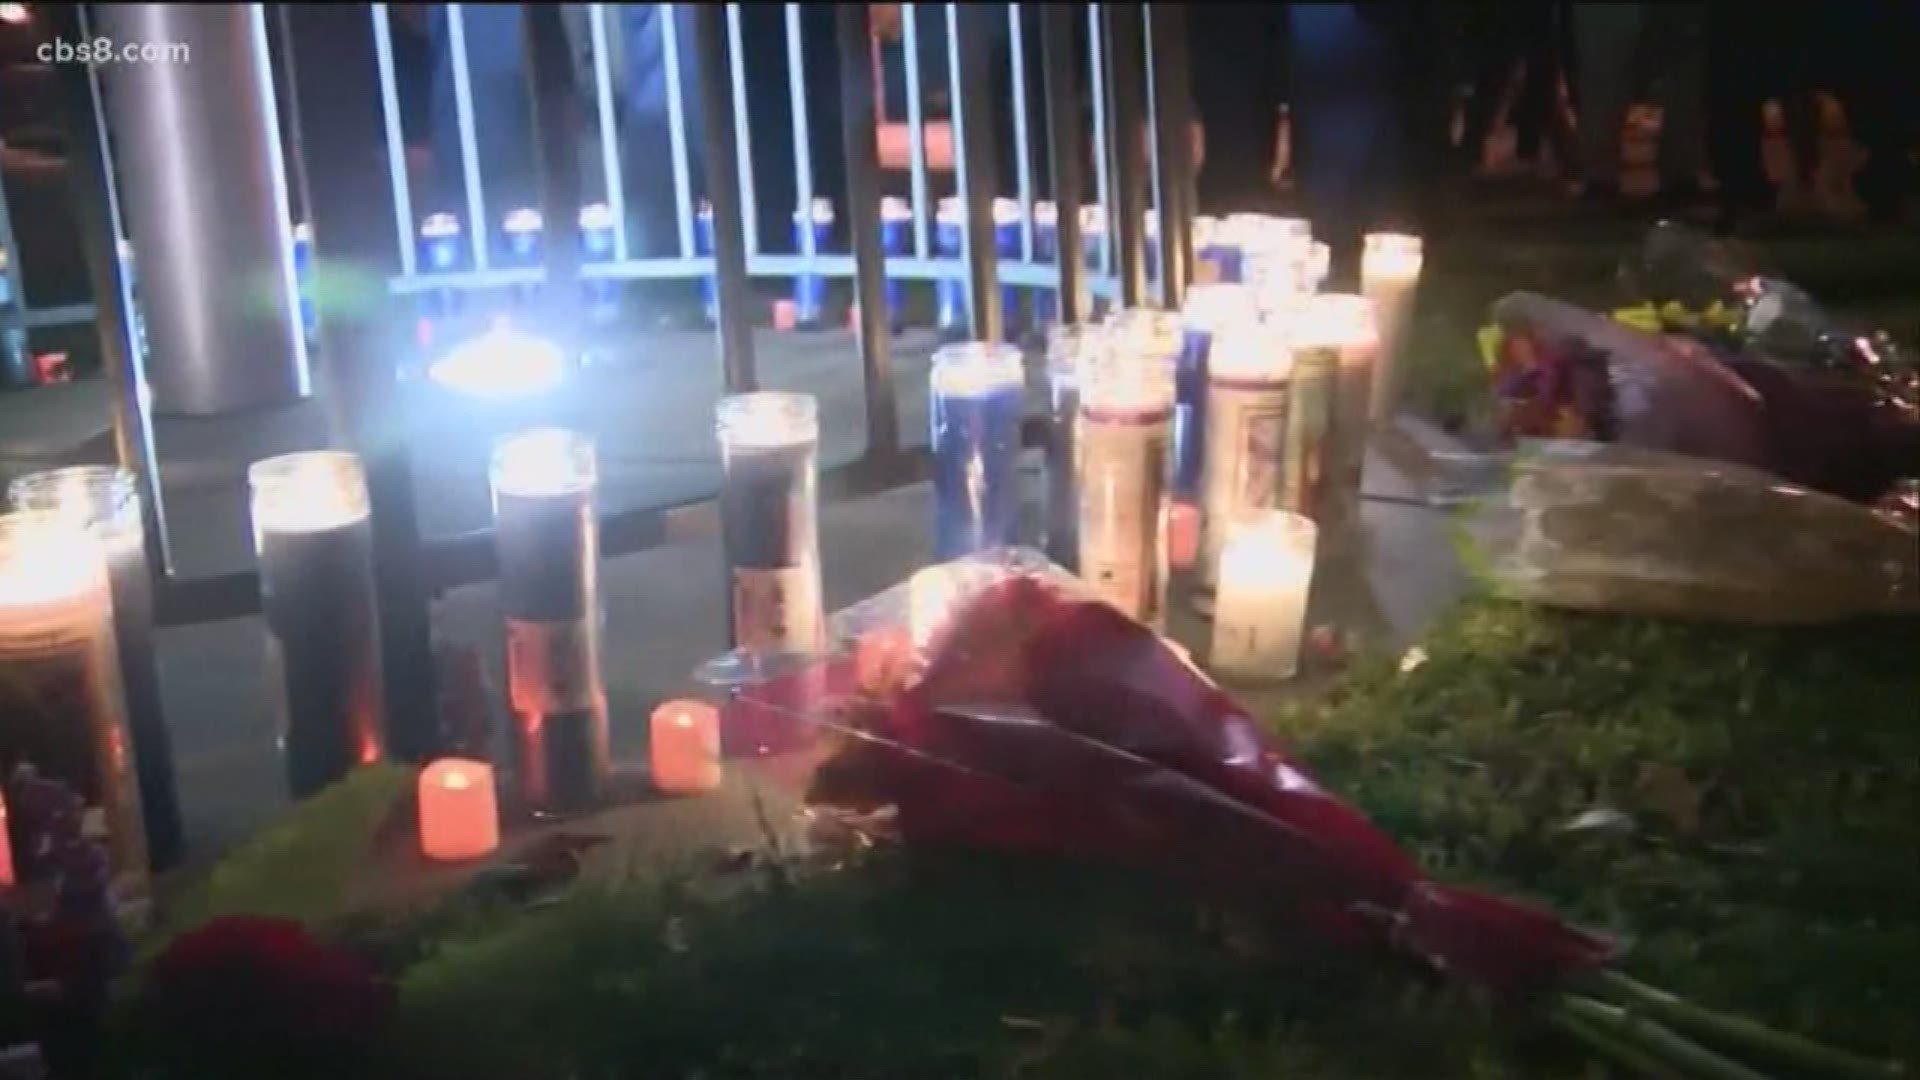 A vigil was held for the Saugus School shooting victims Thursday night.